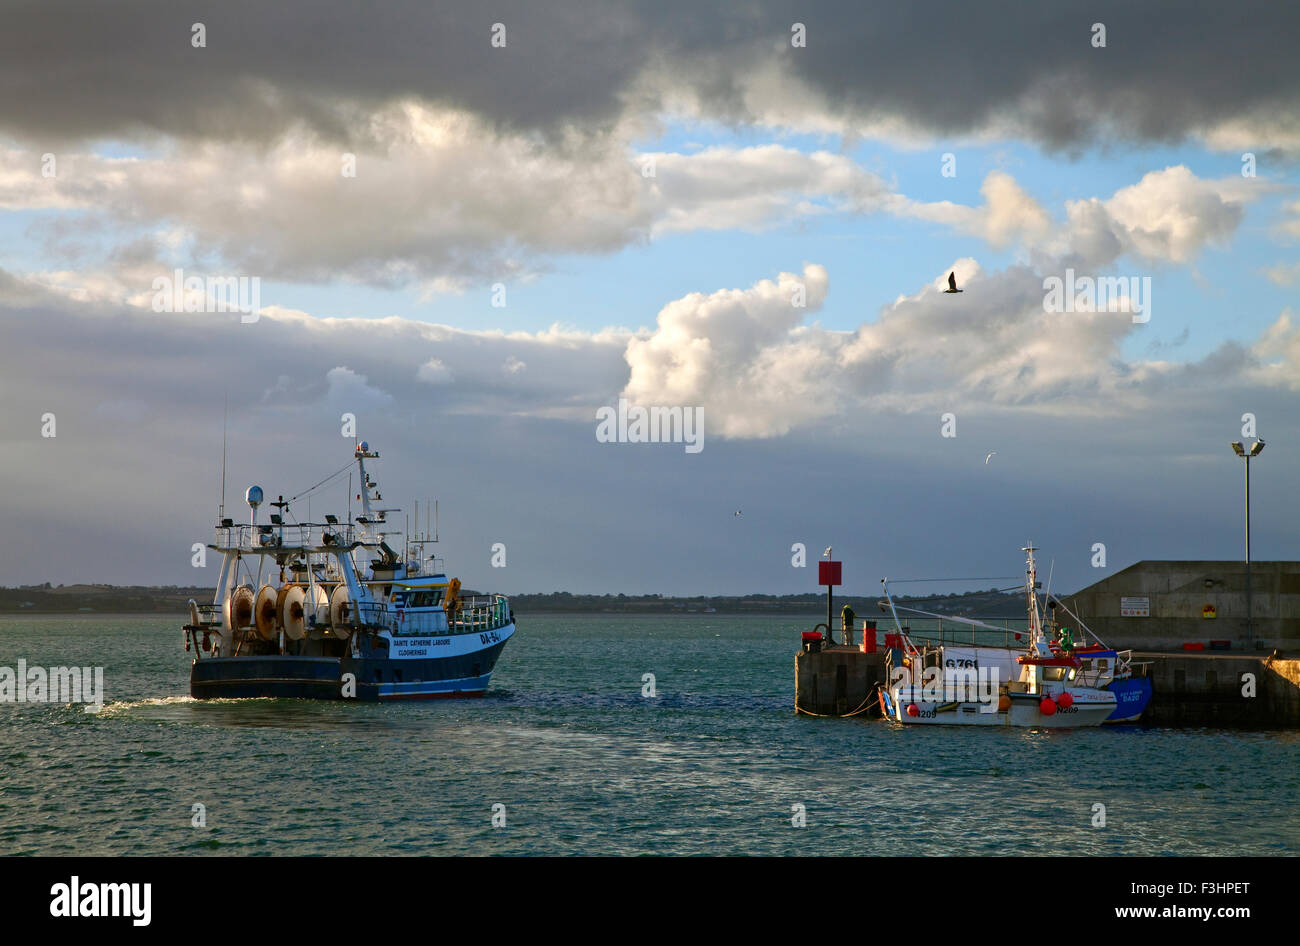 A fishing boat leaving inthe newly renovated Port Oriol harbour, Clogher Head, County Louth, Ireland Stock Photo